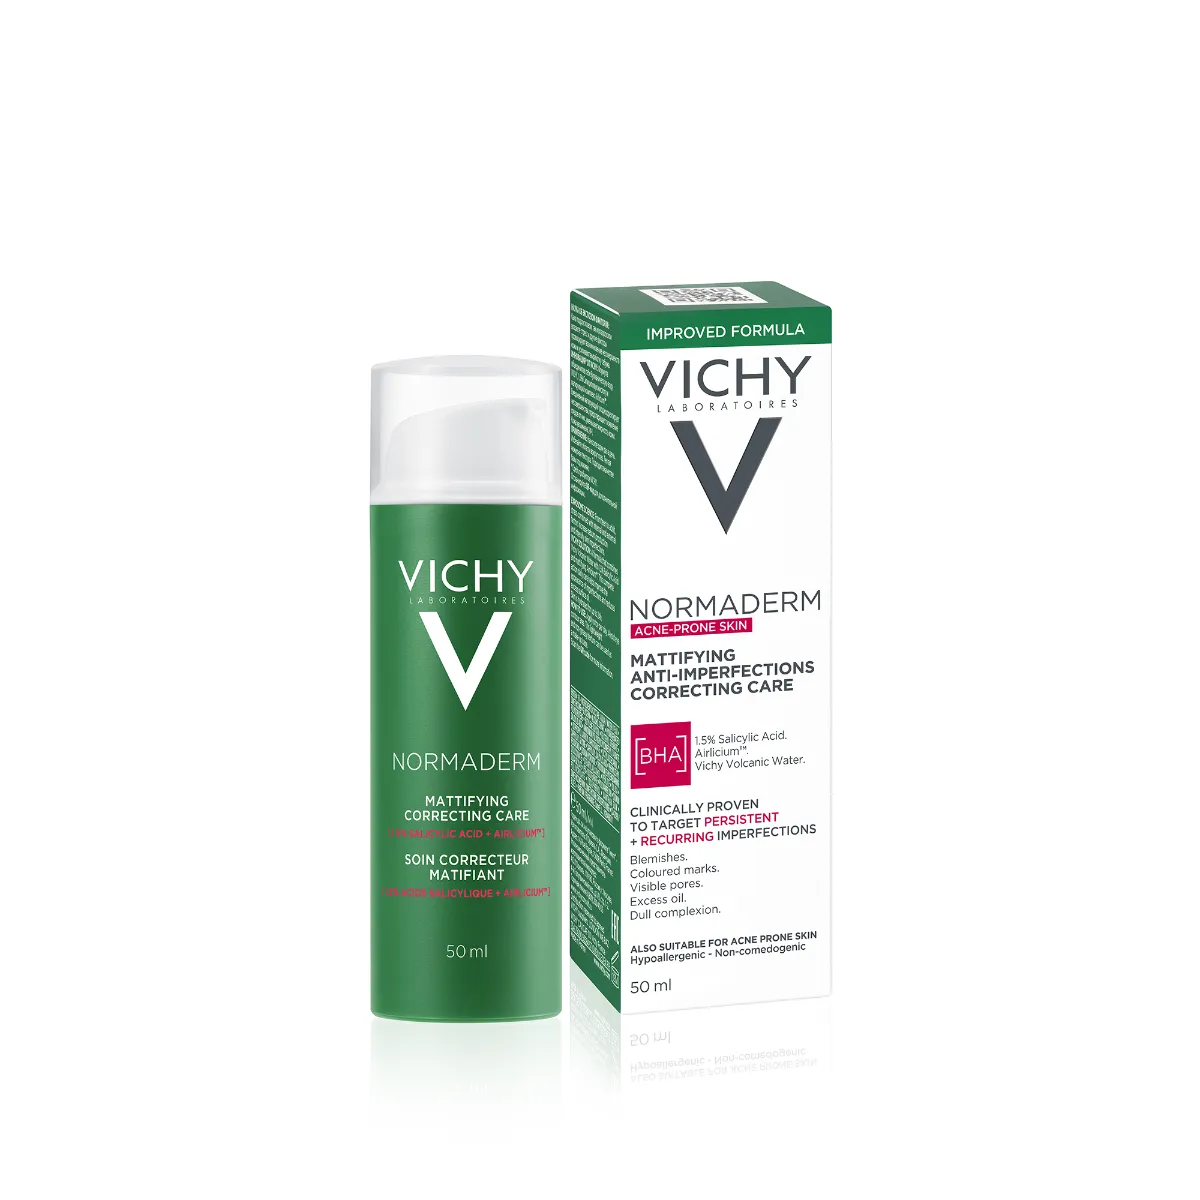 Vichy Normaderm Soin Correcteur Matifiant anti-imperfections 50 ml 3337875414111